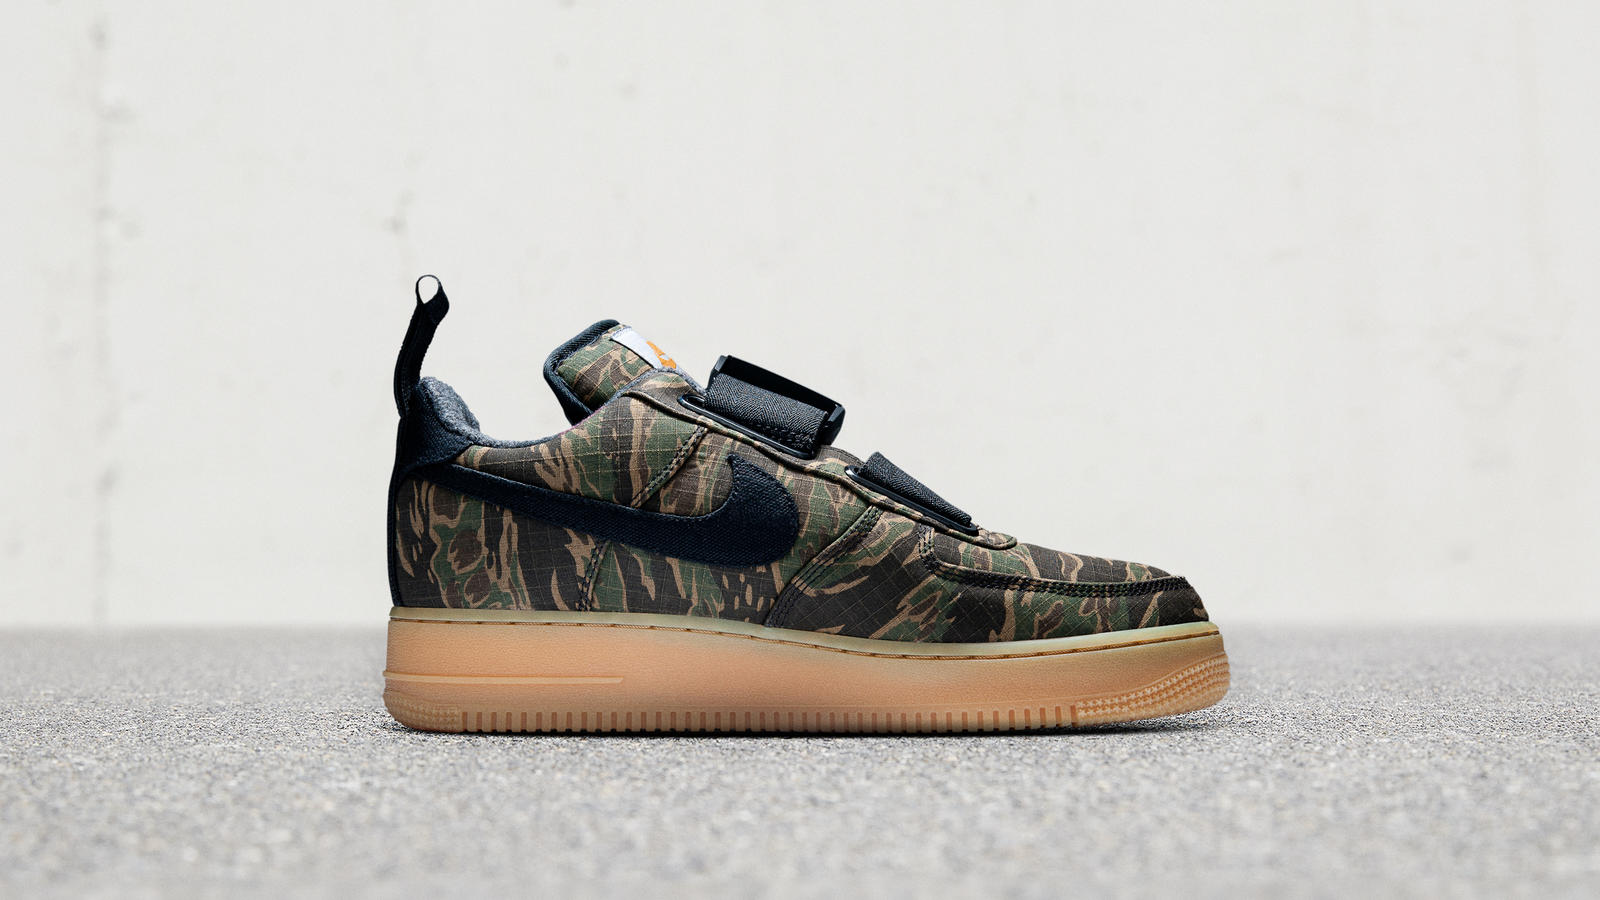 Nike X Carhartt Wip Collection - Air Force Utility Carhartt , HD Wallpaper & Backgrounds